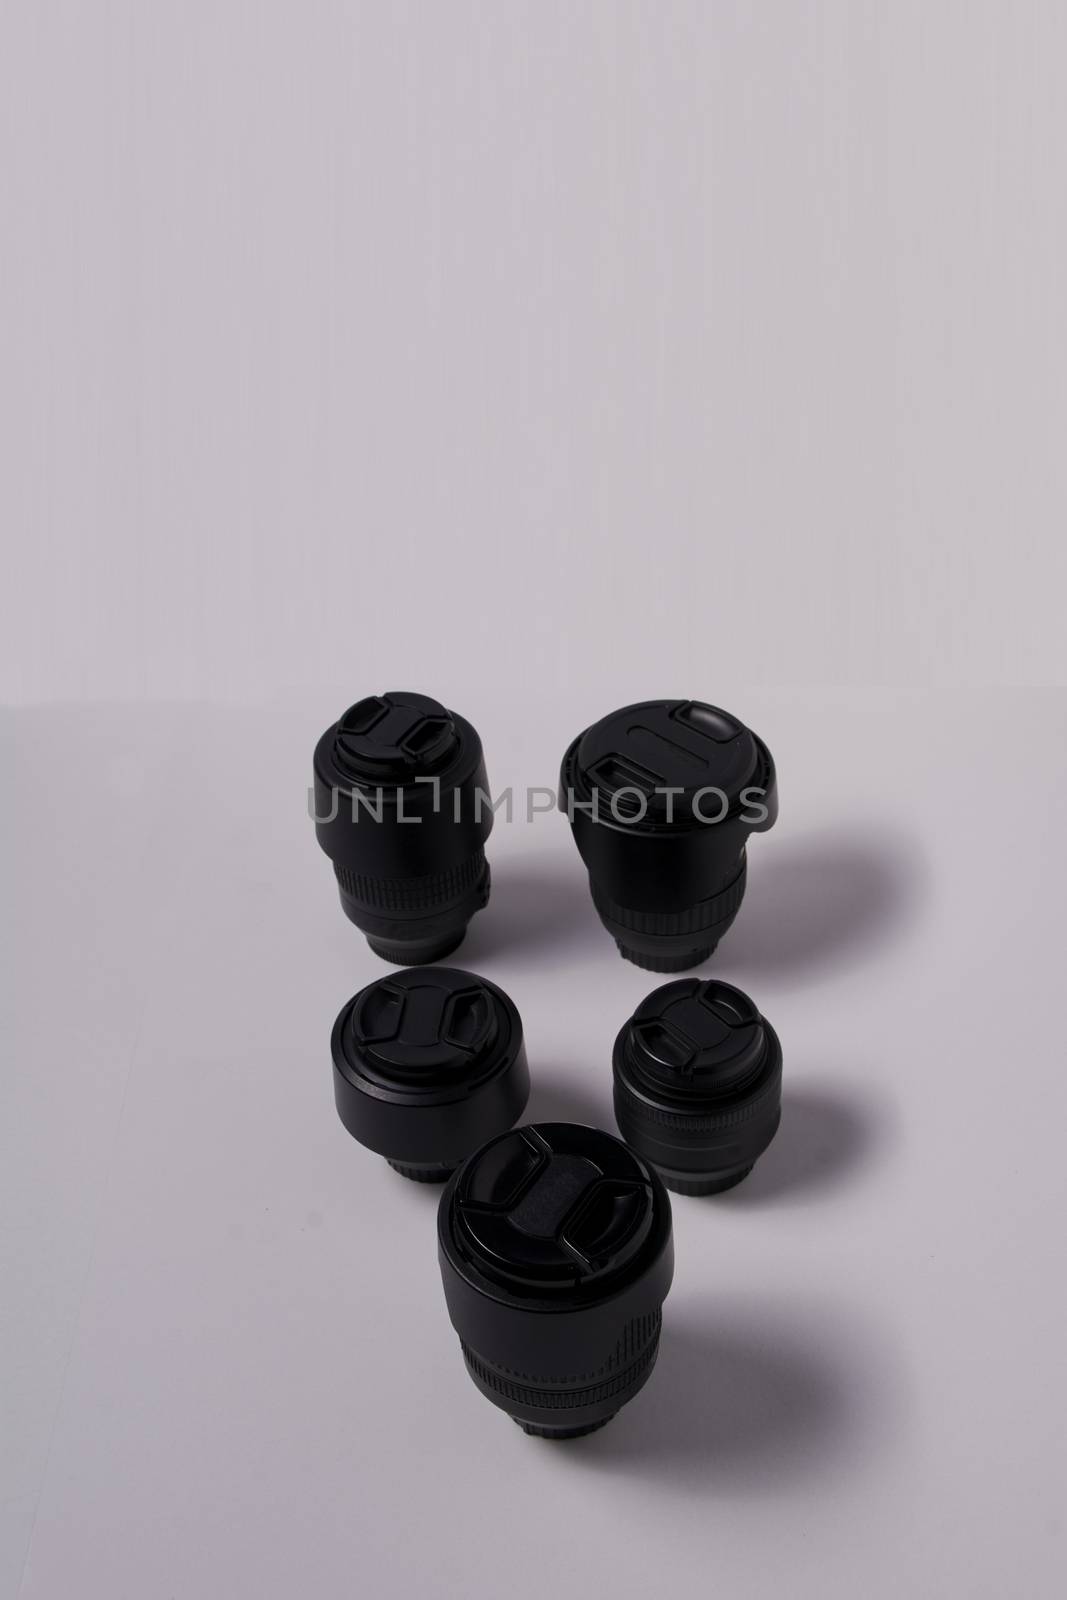 Photographic lens on white and clear background, Love photography